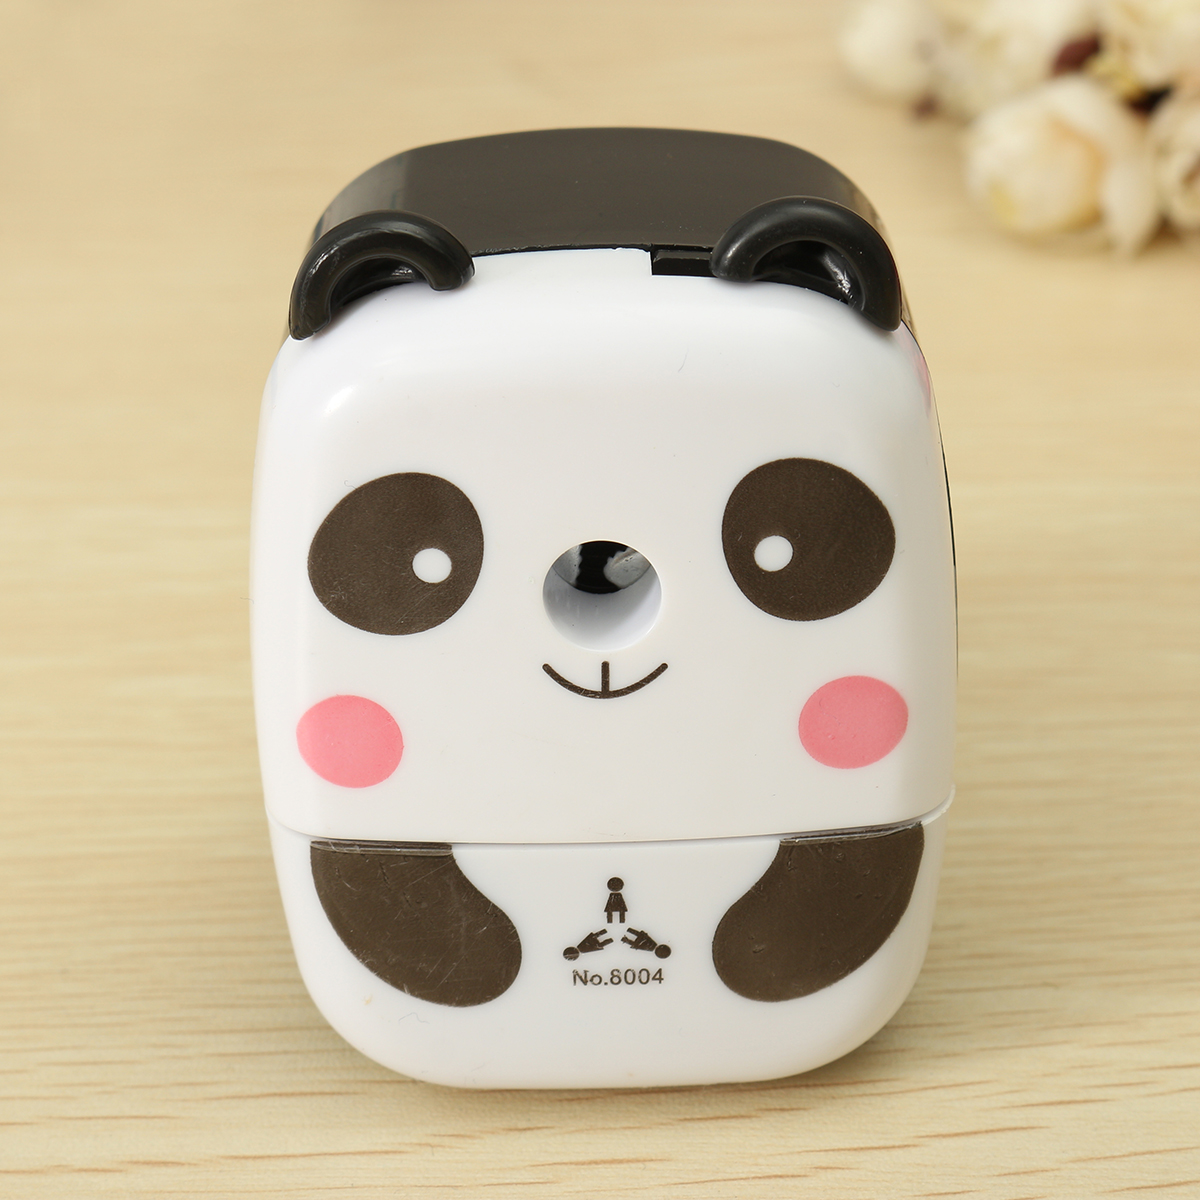 Practical Tiger Panda Animal Shaped Mini Manual Pencil Sharpener Gifts Office School Students Stationery Supplies—4